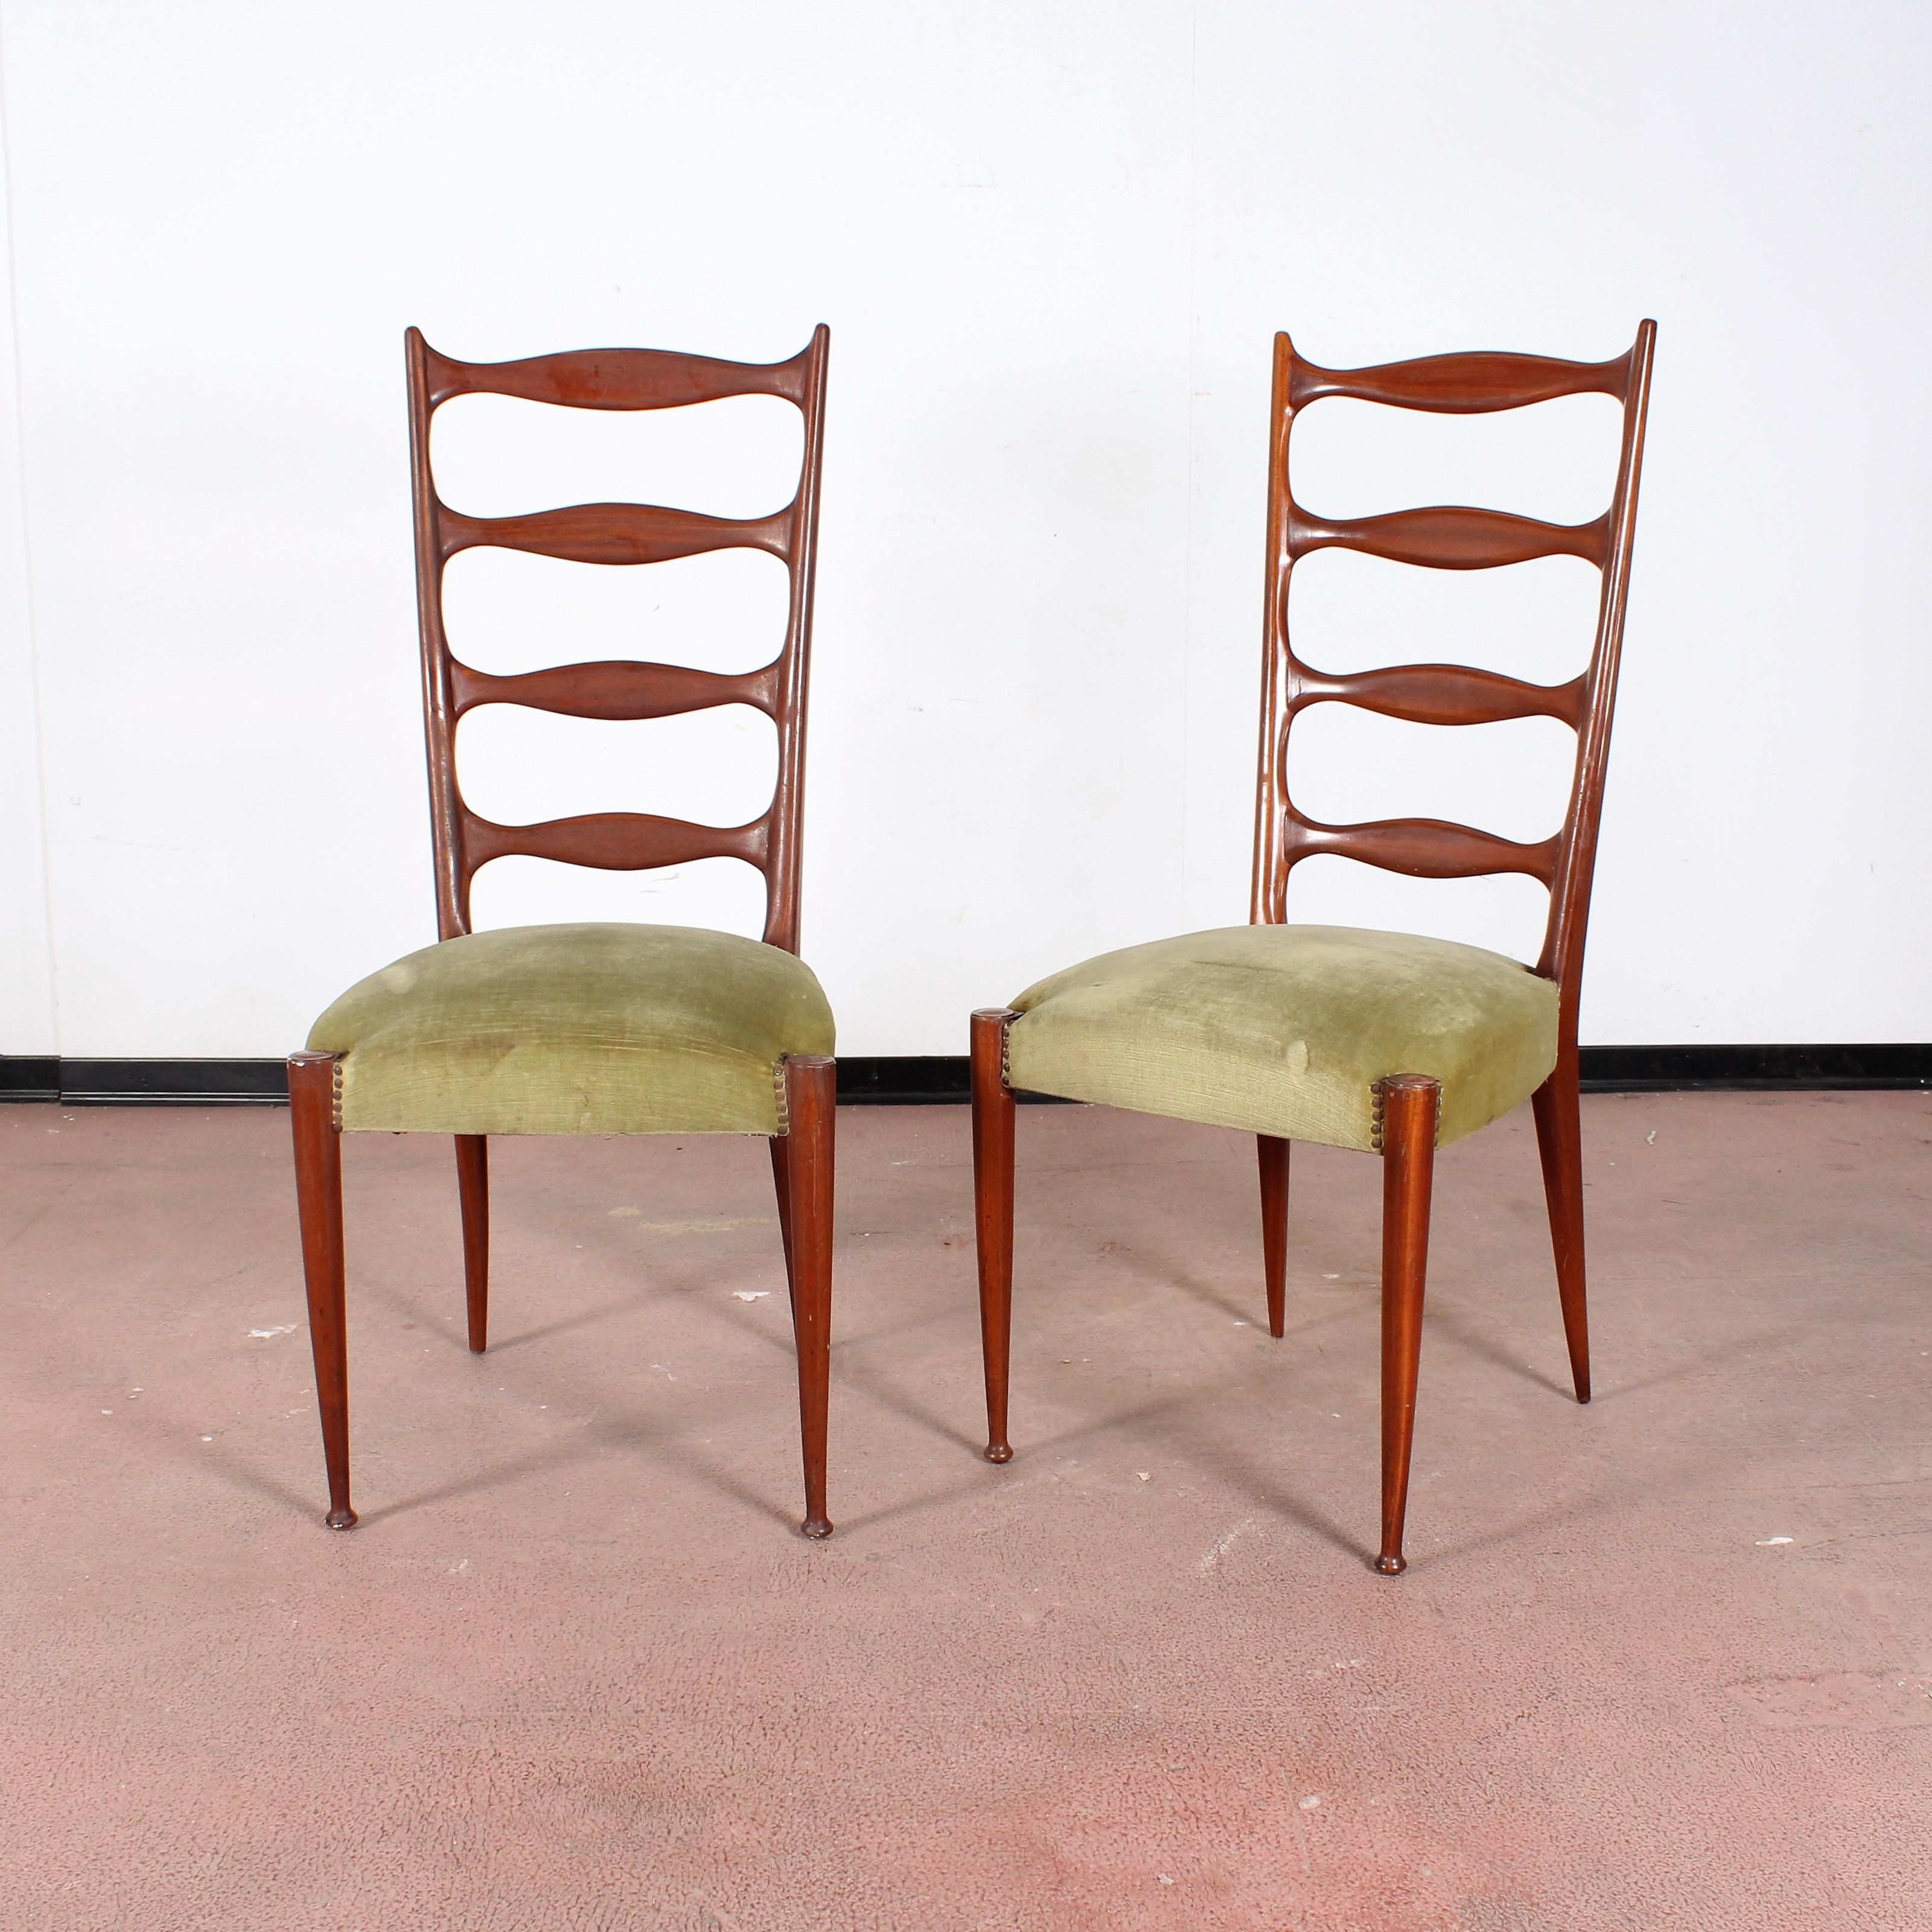 Set of four dining chairs with wooden structure, green velvet covering, and spiked legs. Paolo Buffa style, Italian manufacture in 1950s.
Wear consistent with age and use.
 